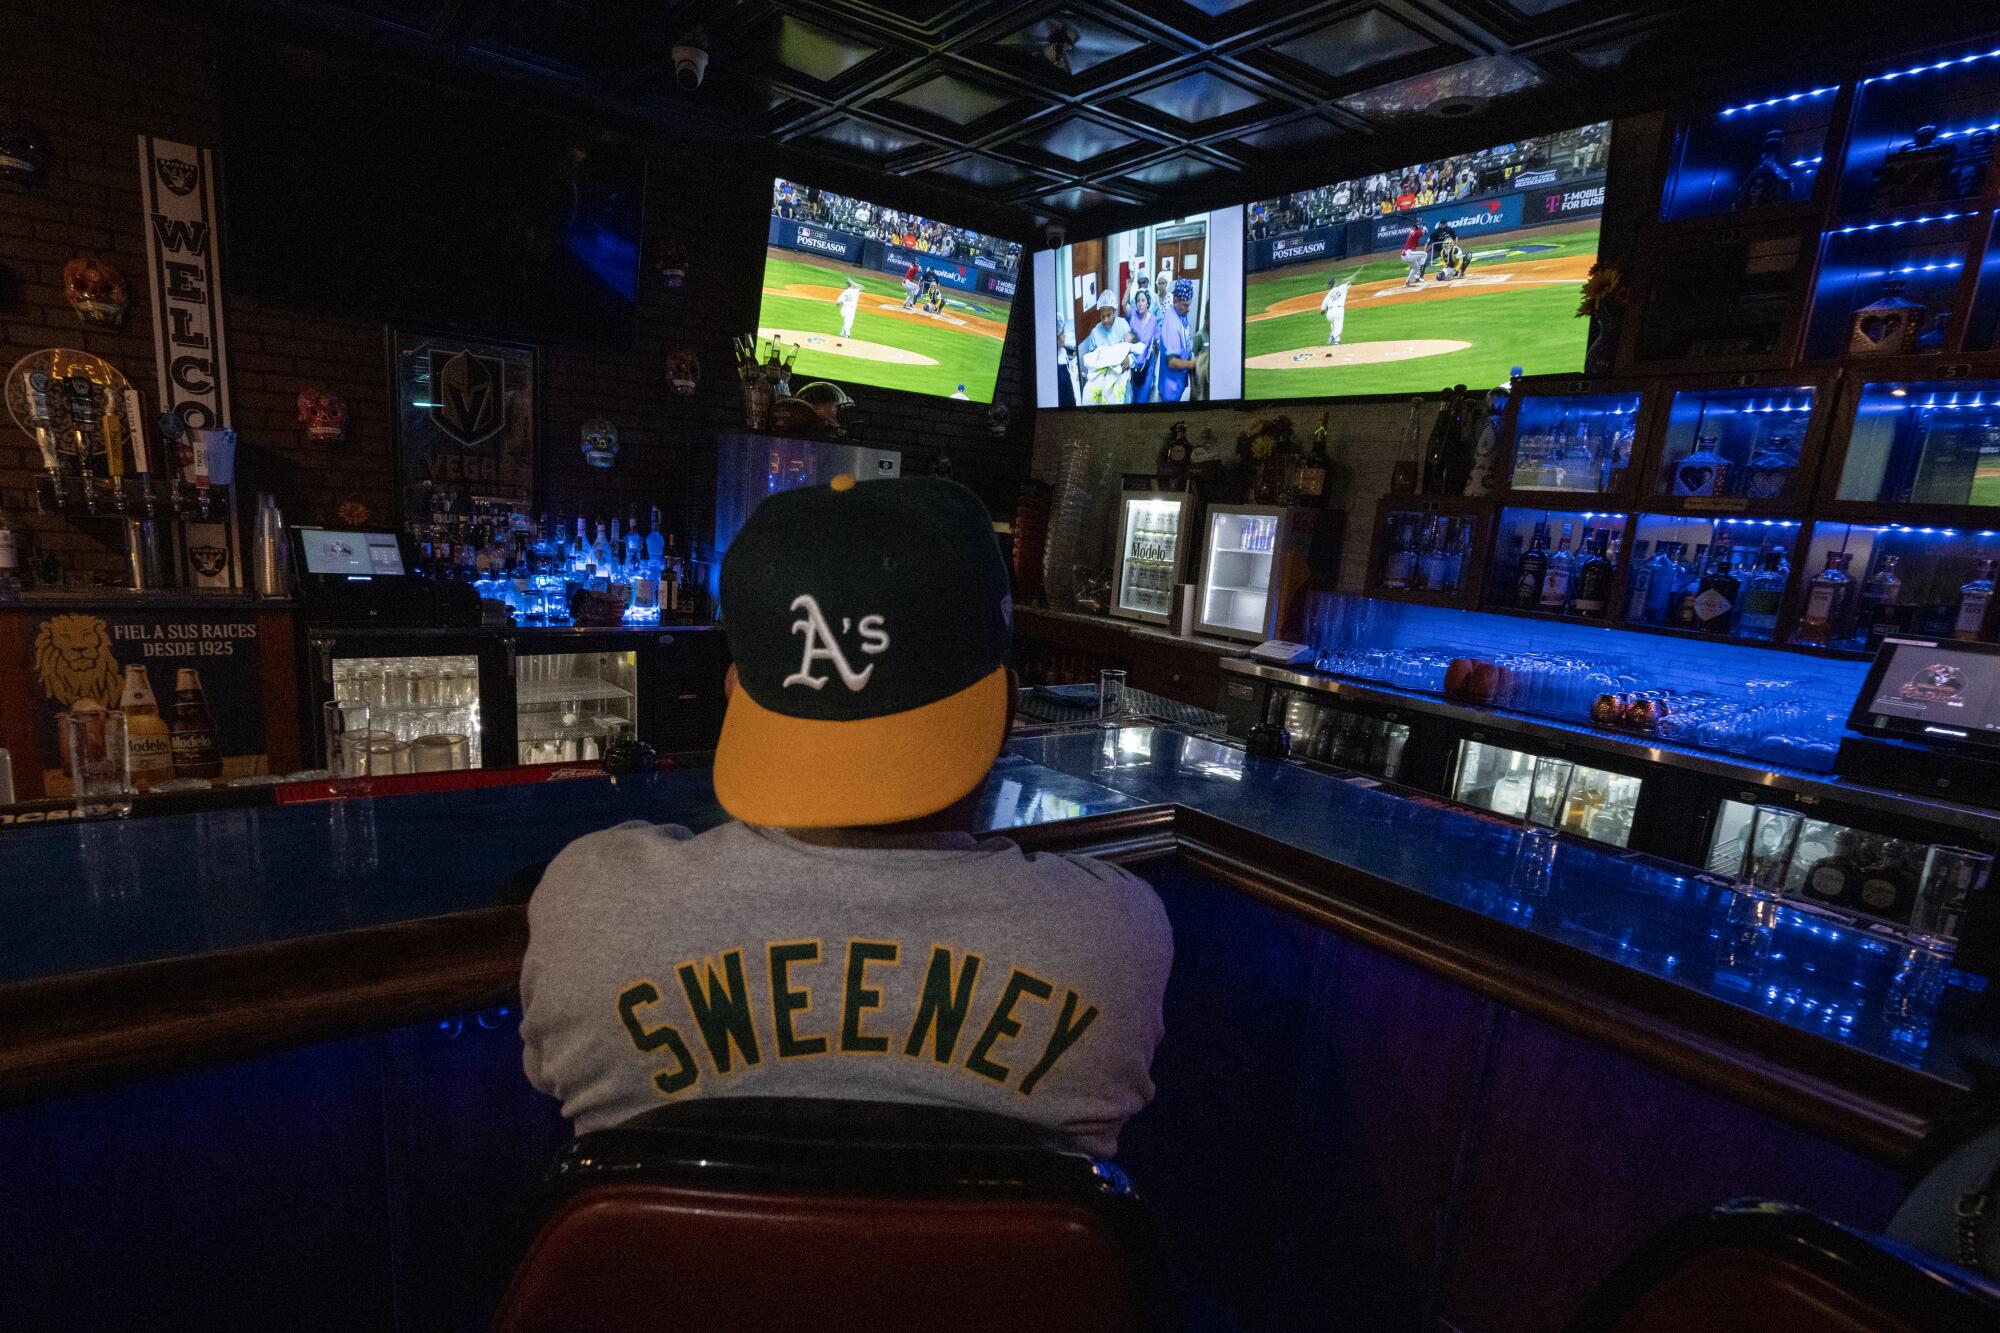 A's moving to a Dodgers town? Why Las Vegas feels true blue - Los